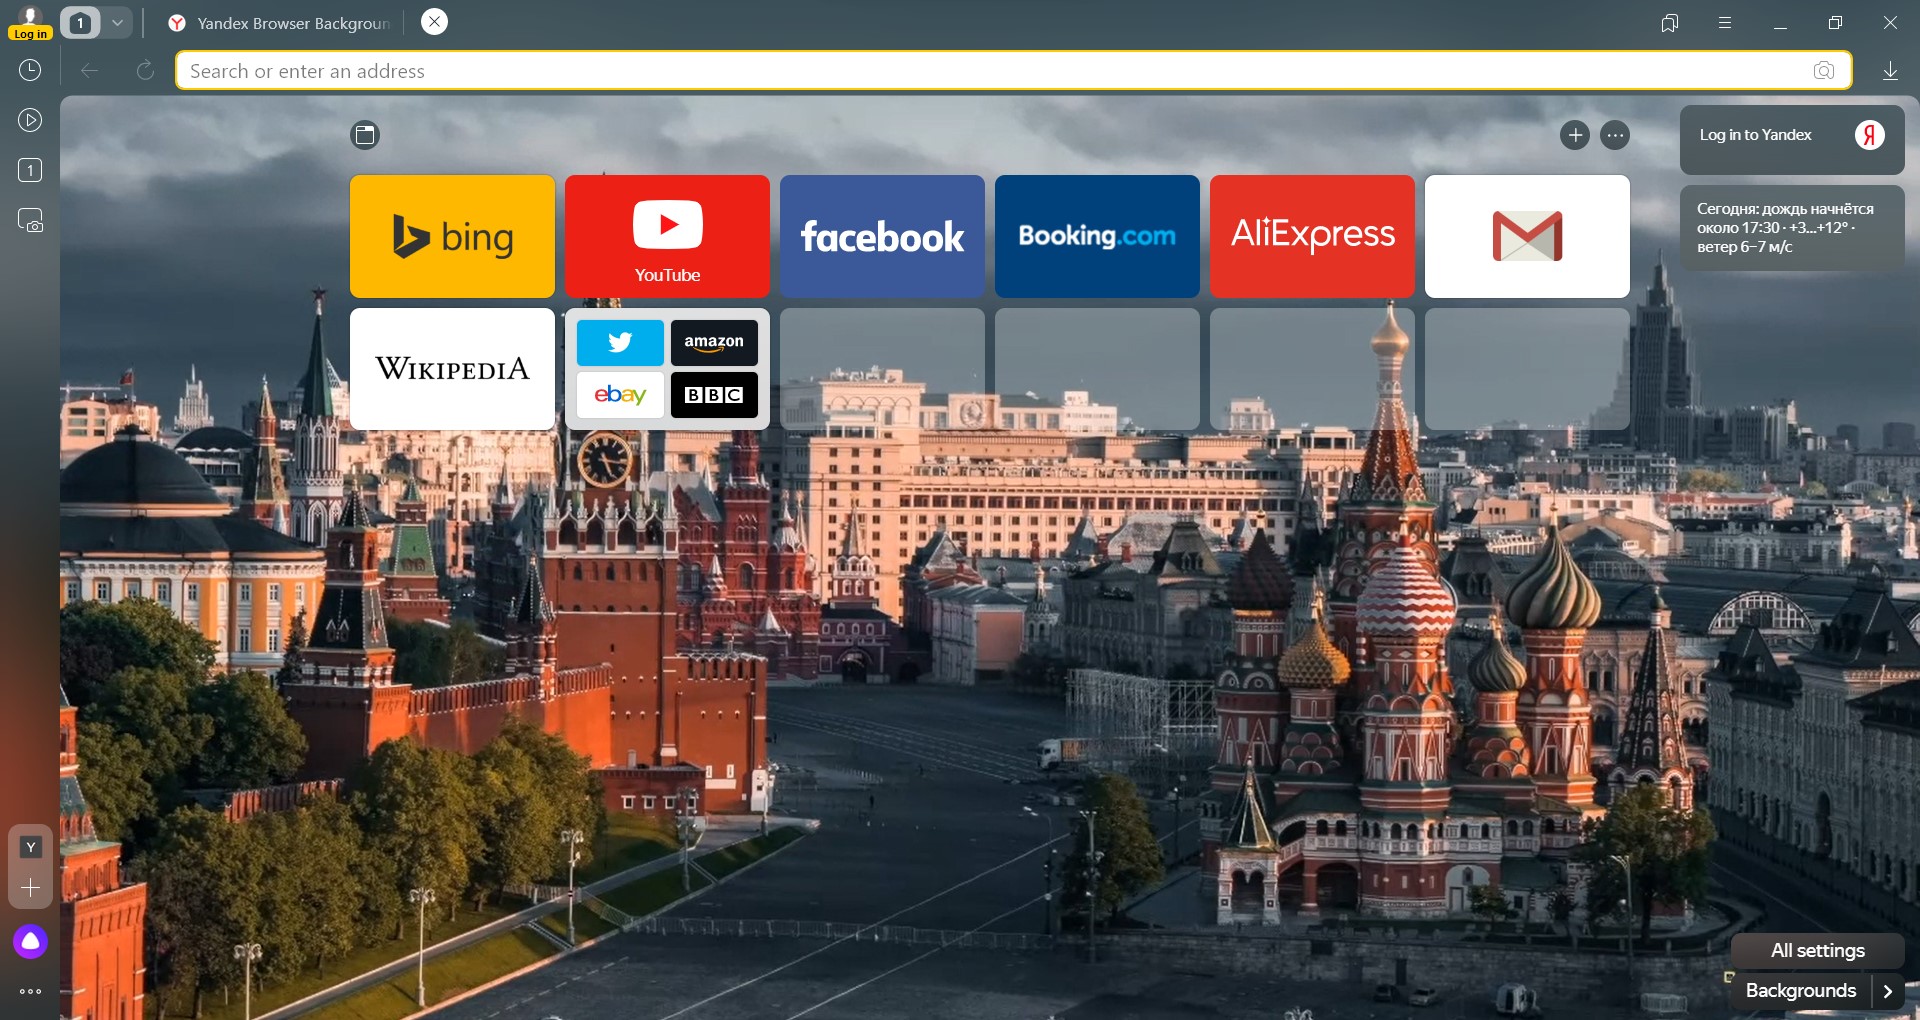 screenshot yandex browser with background